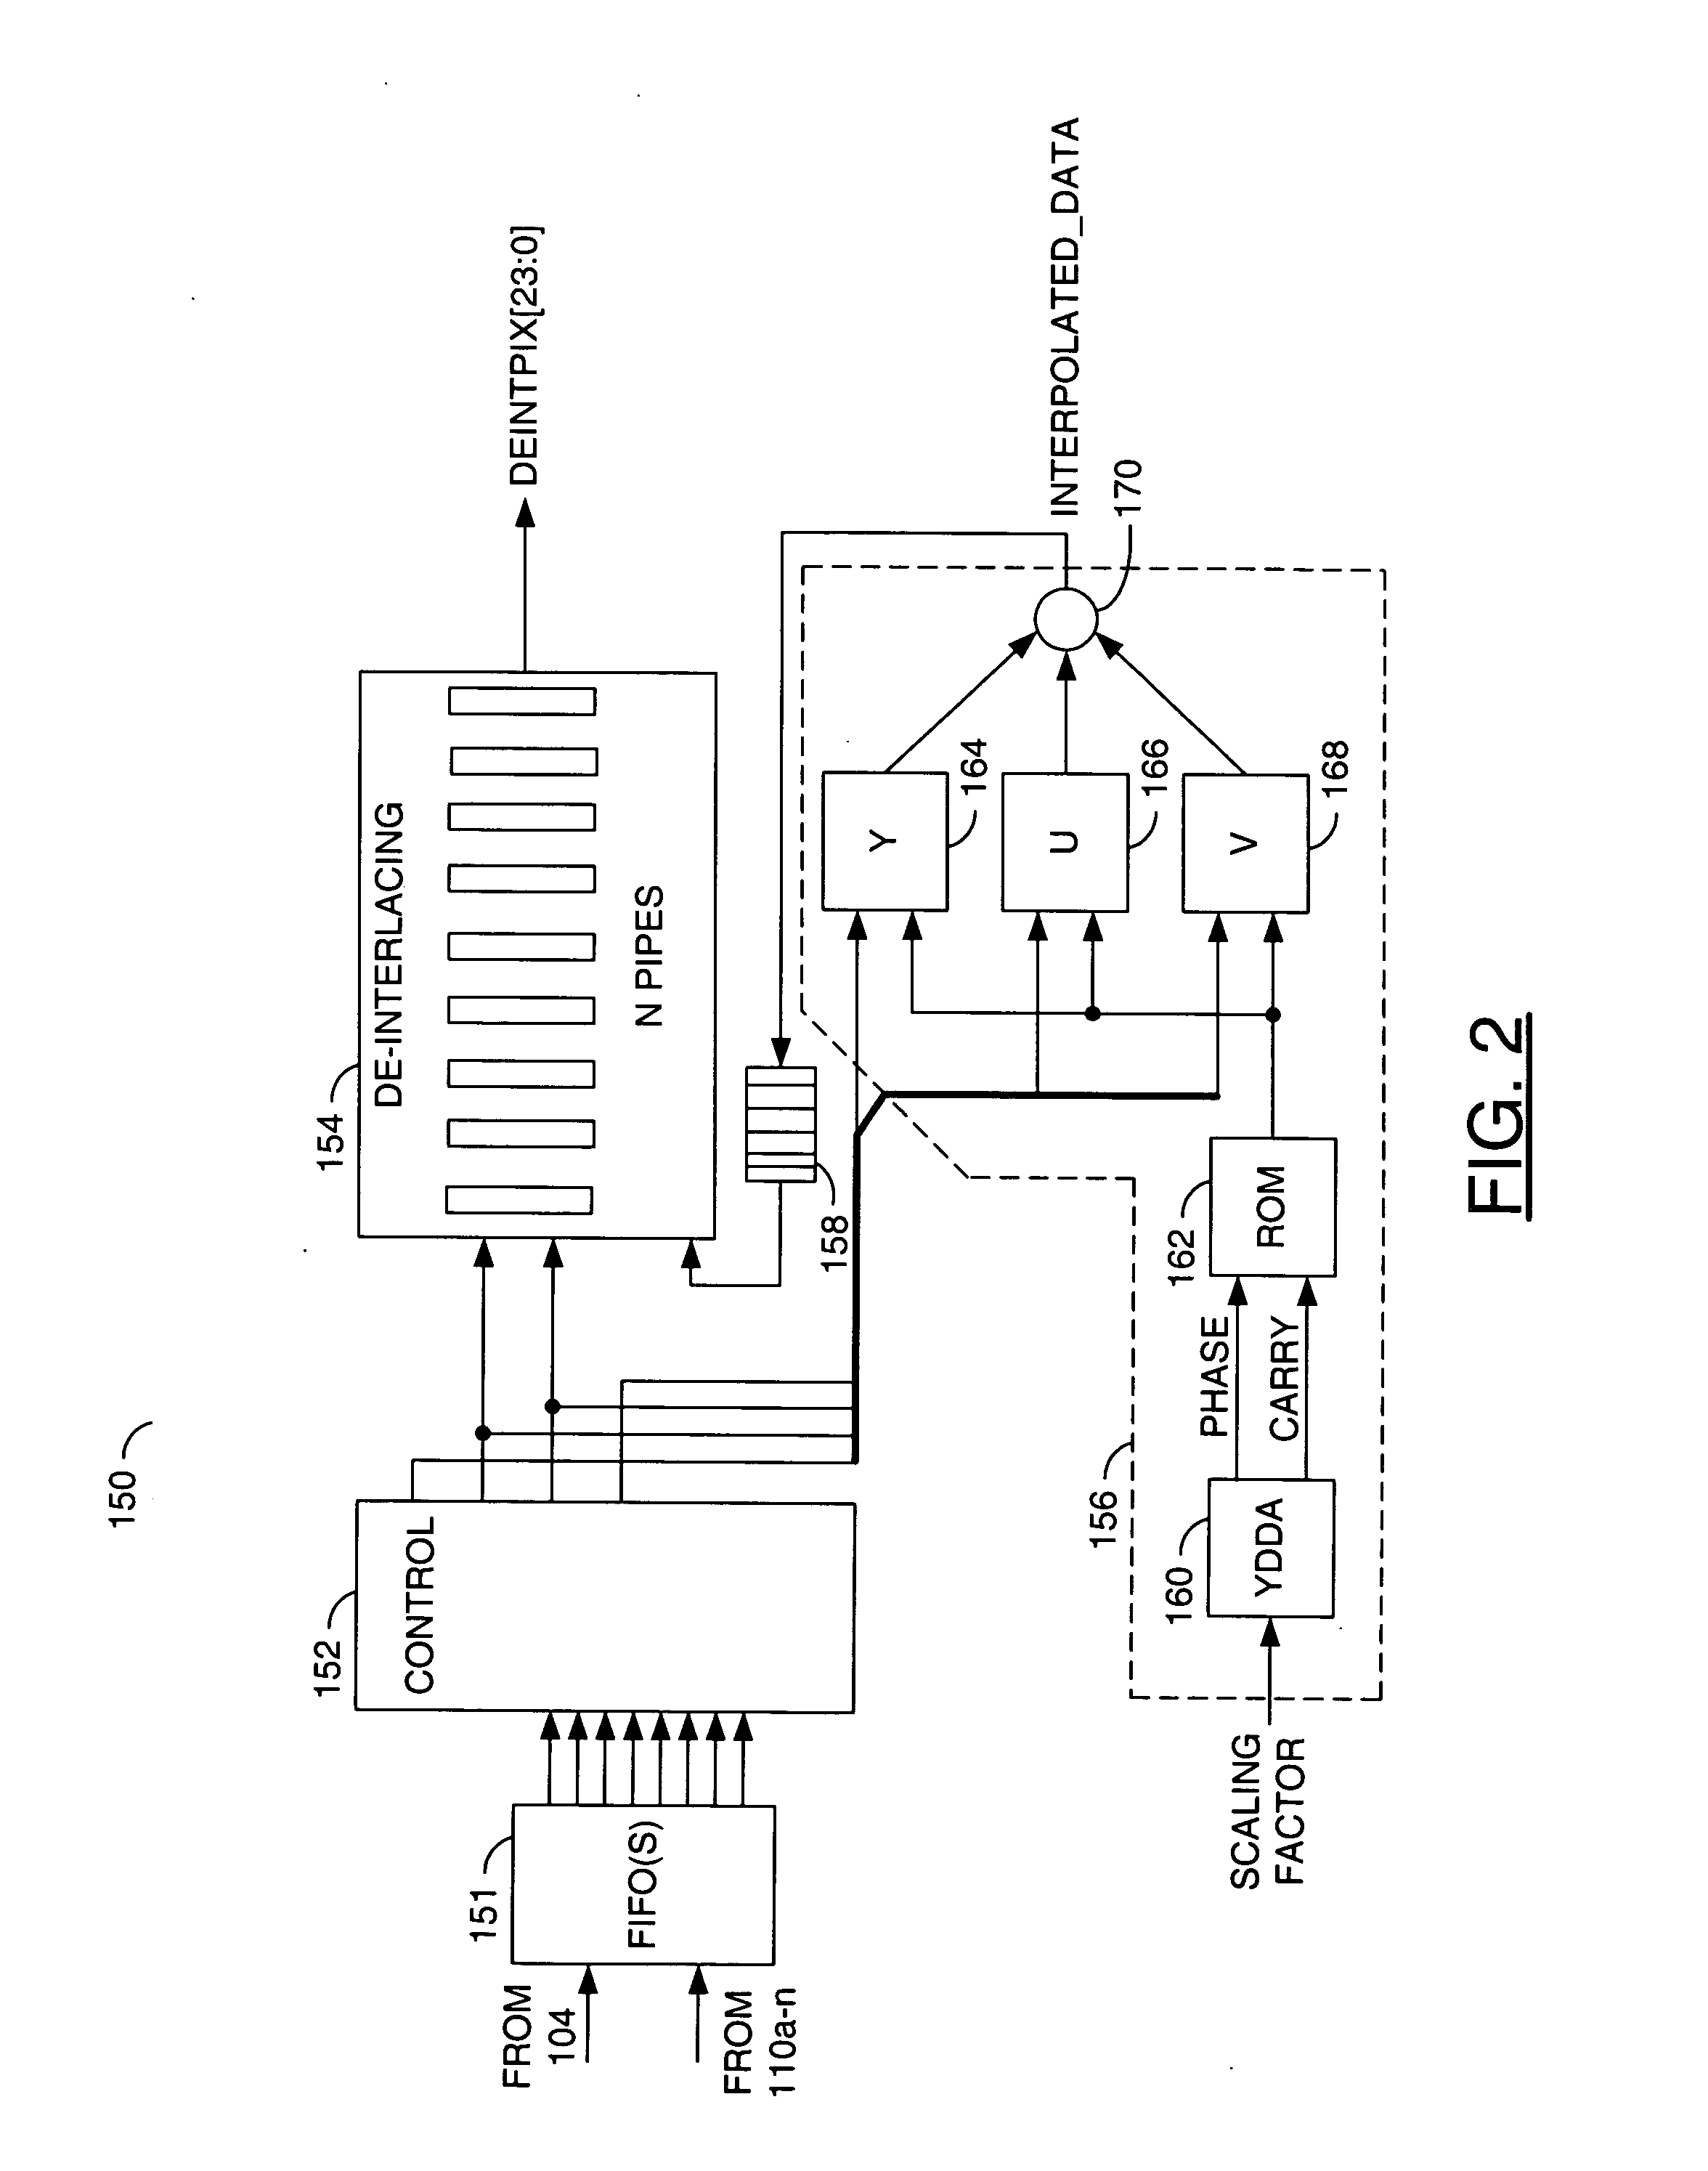 Systems and methods for deinterlacing video signals